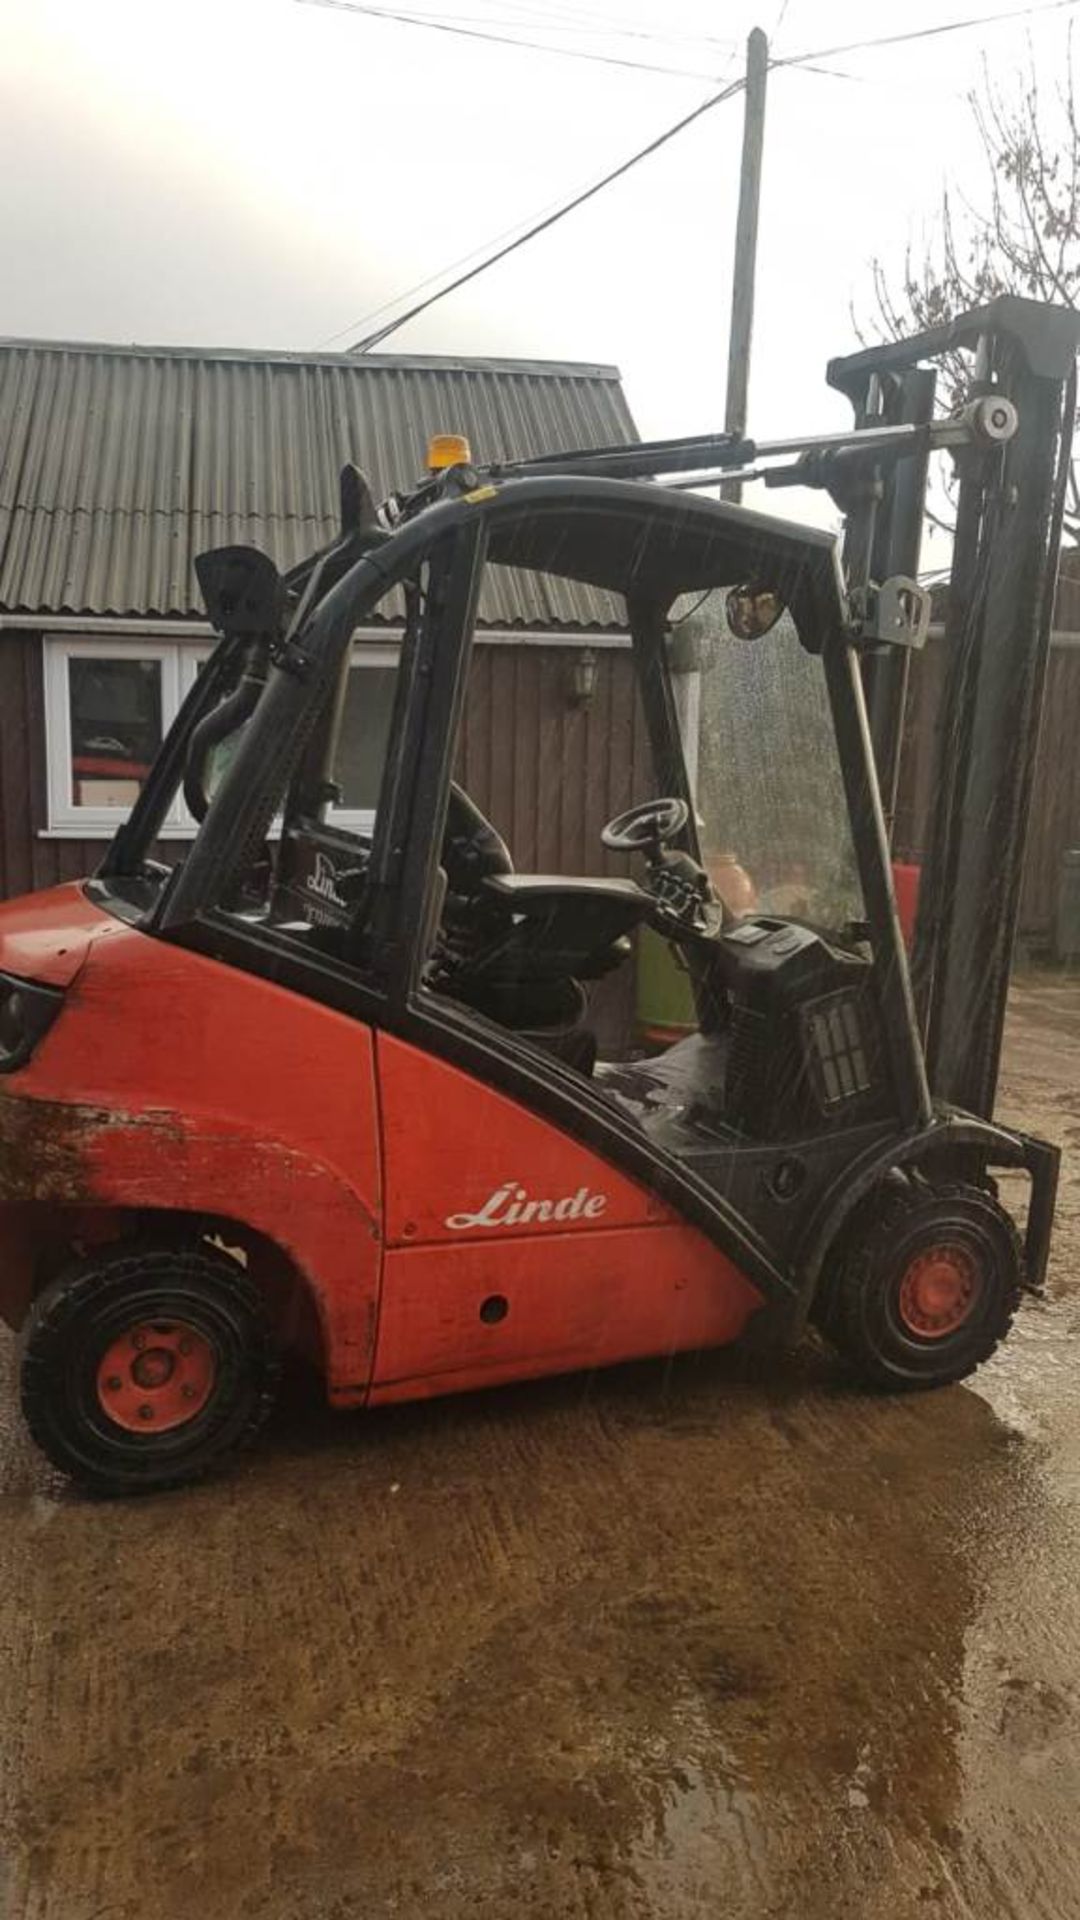 LINDE H25D DIESEL FORKLIFT, 2.5 TONNE RATED, PART CABIN. VENDORS COMMENTS: WHEN TESTED THIS